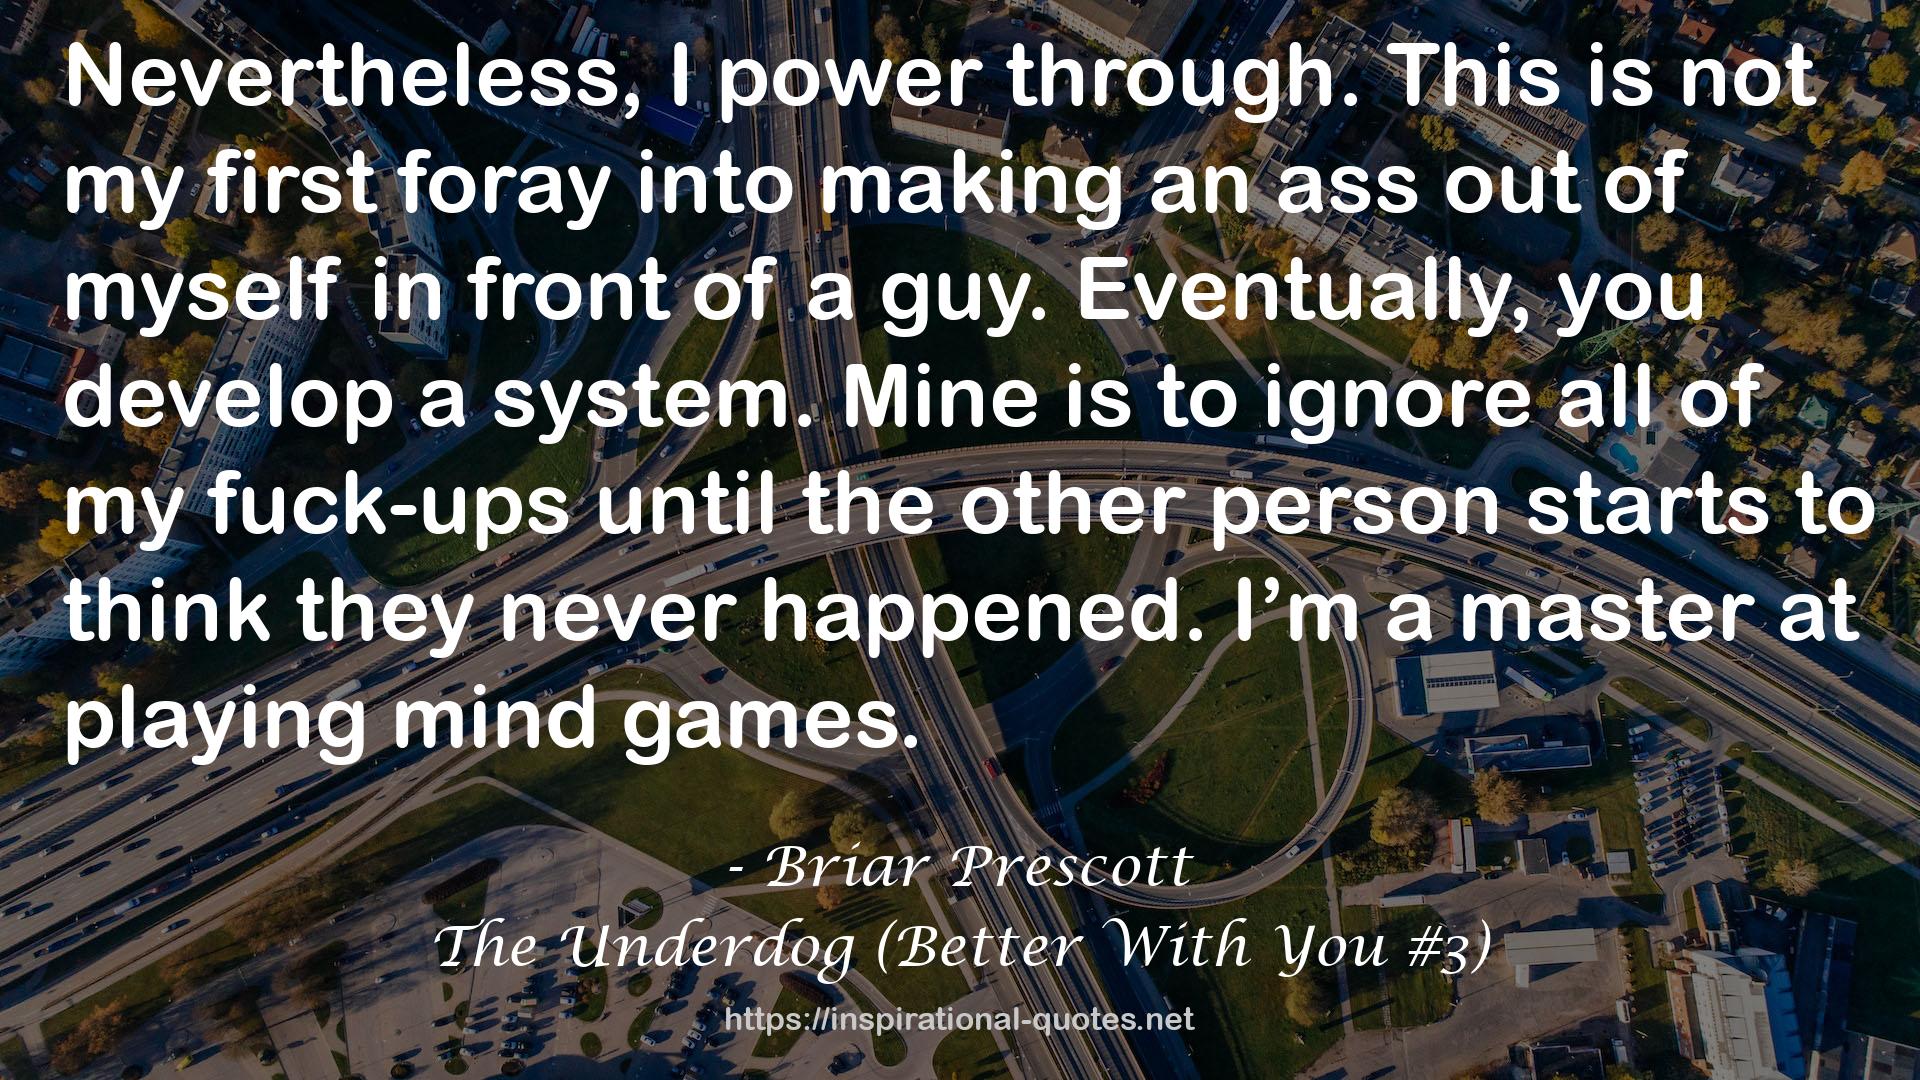 The Underdog (Better With You #3) QUOTES